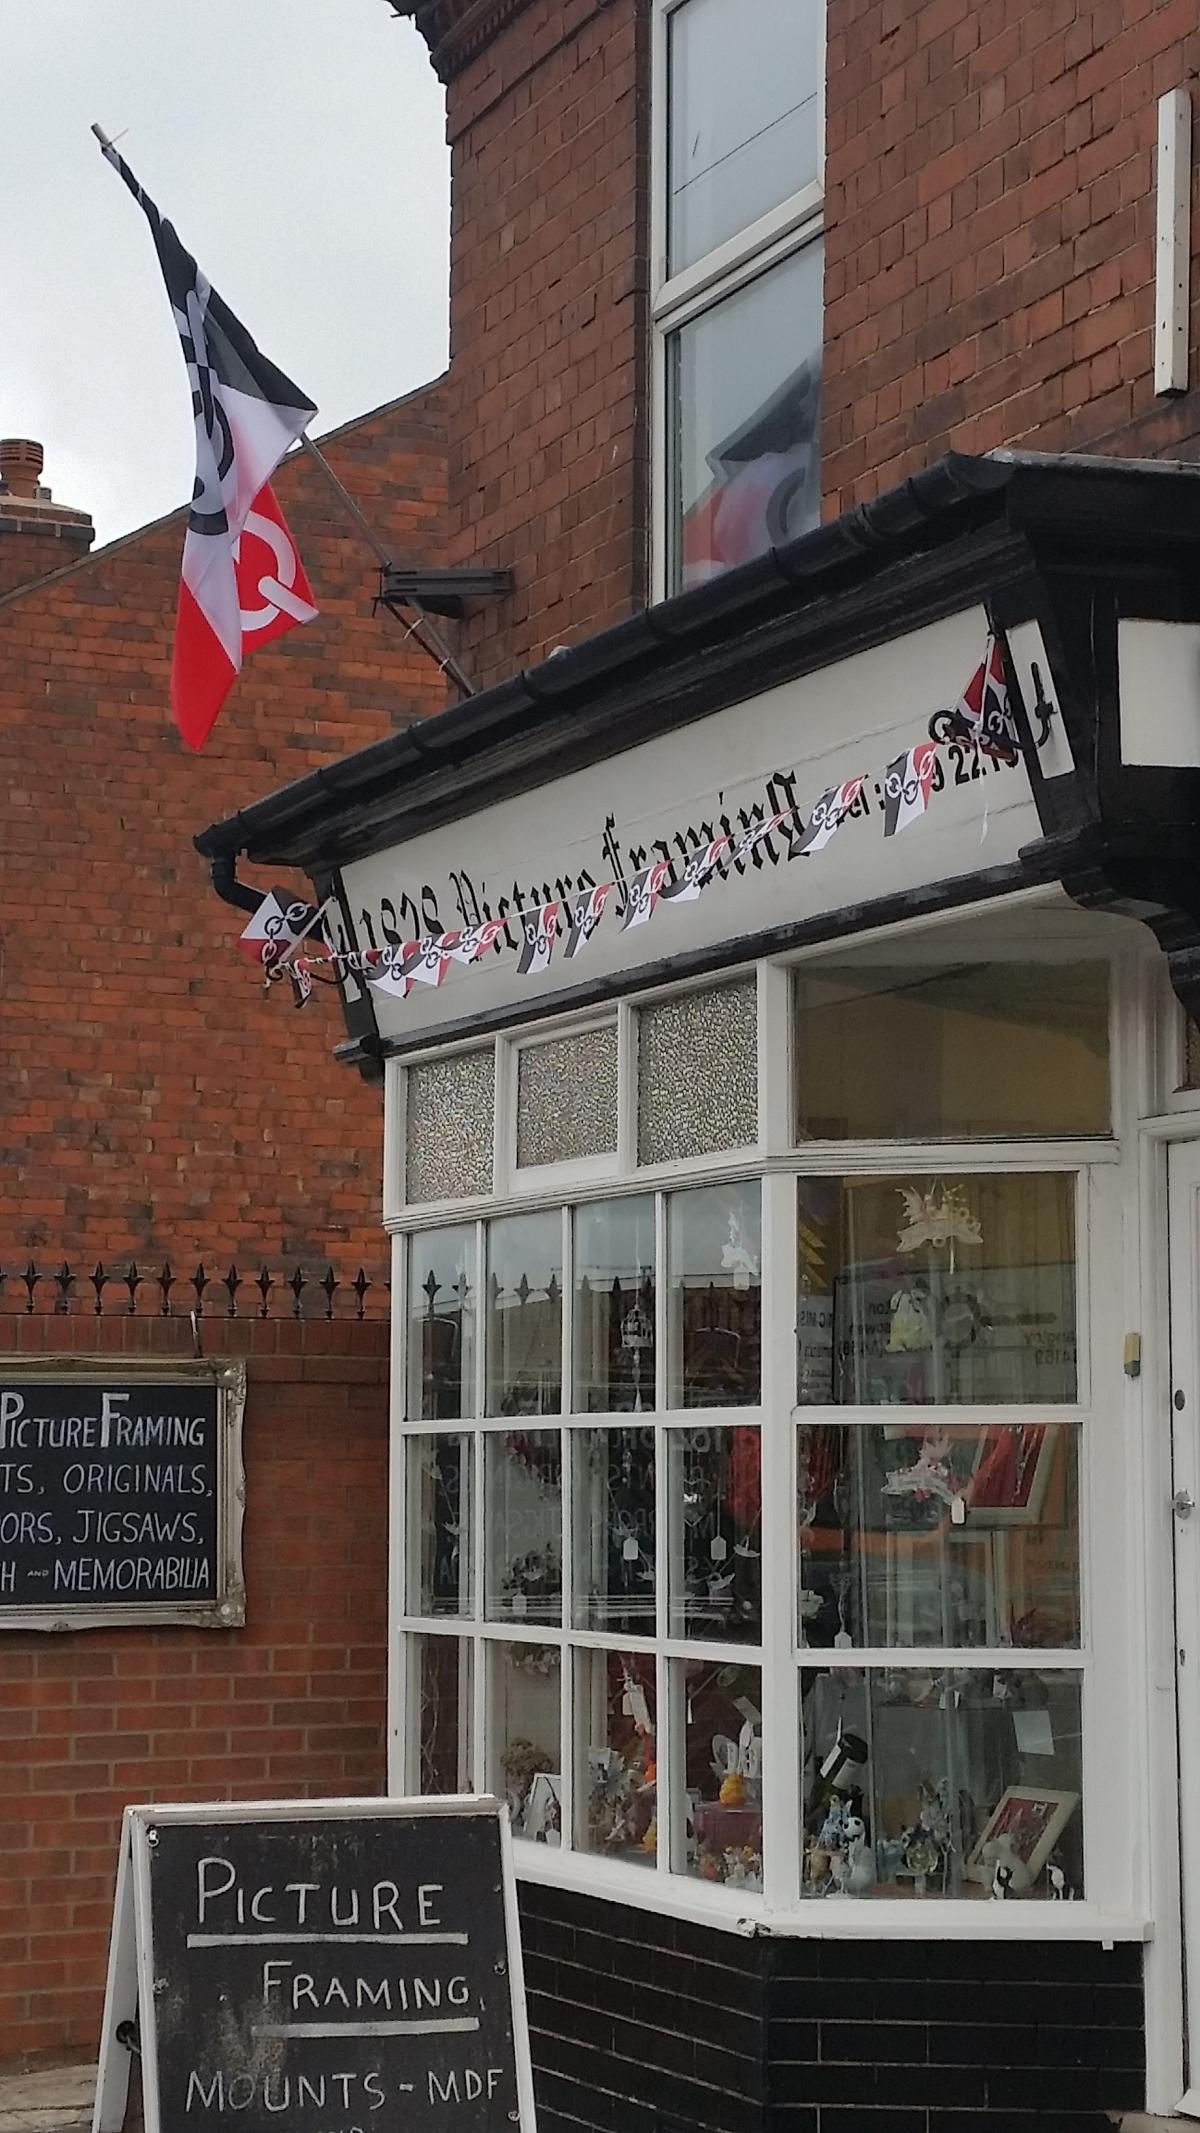 Businesses around Halesowen North are joining in with the Black Country Day celebrations.